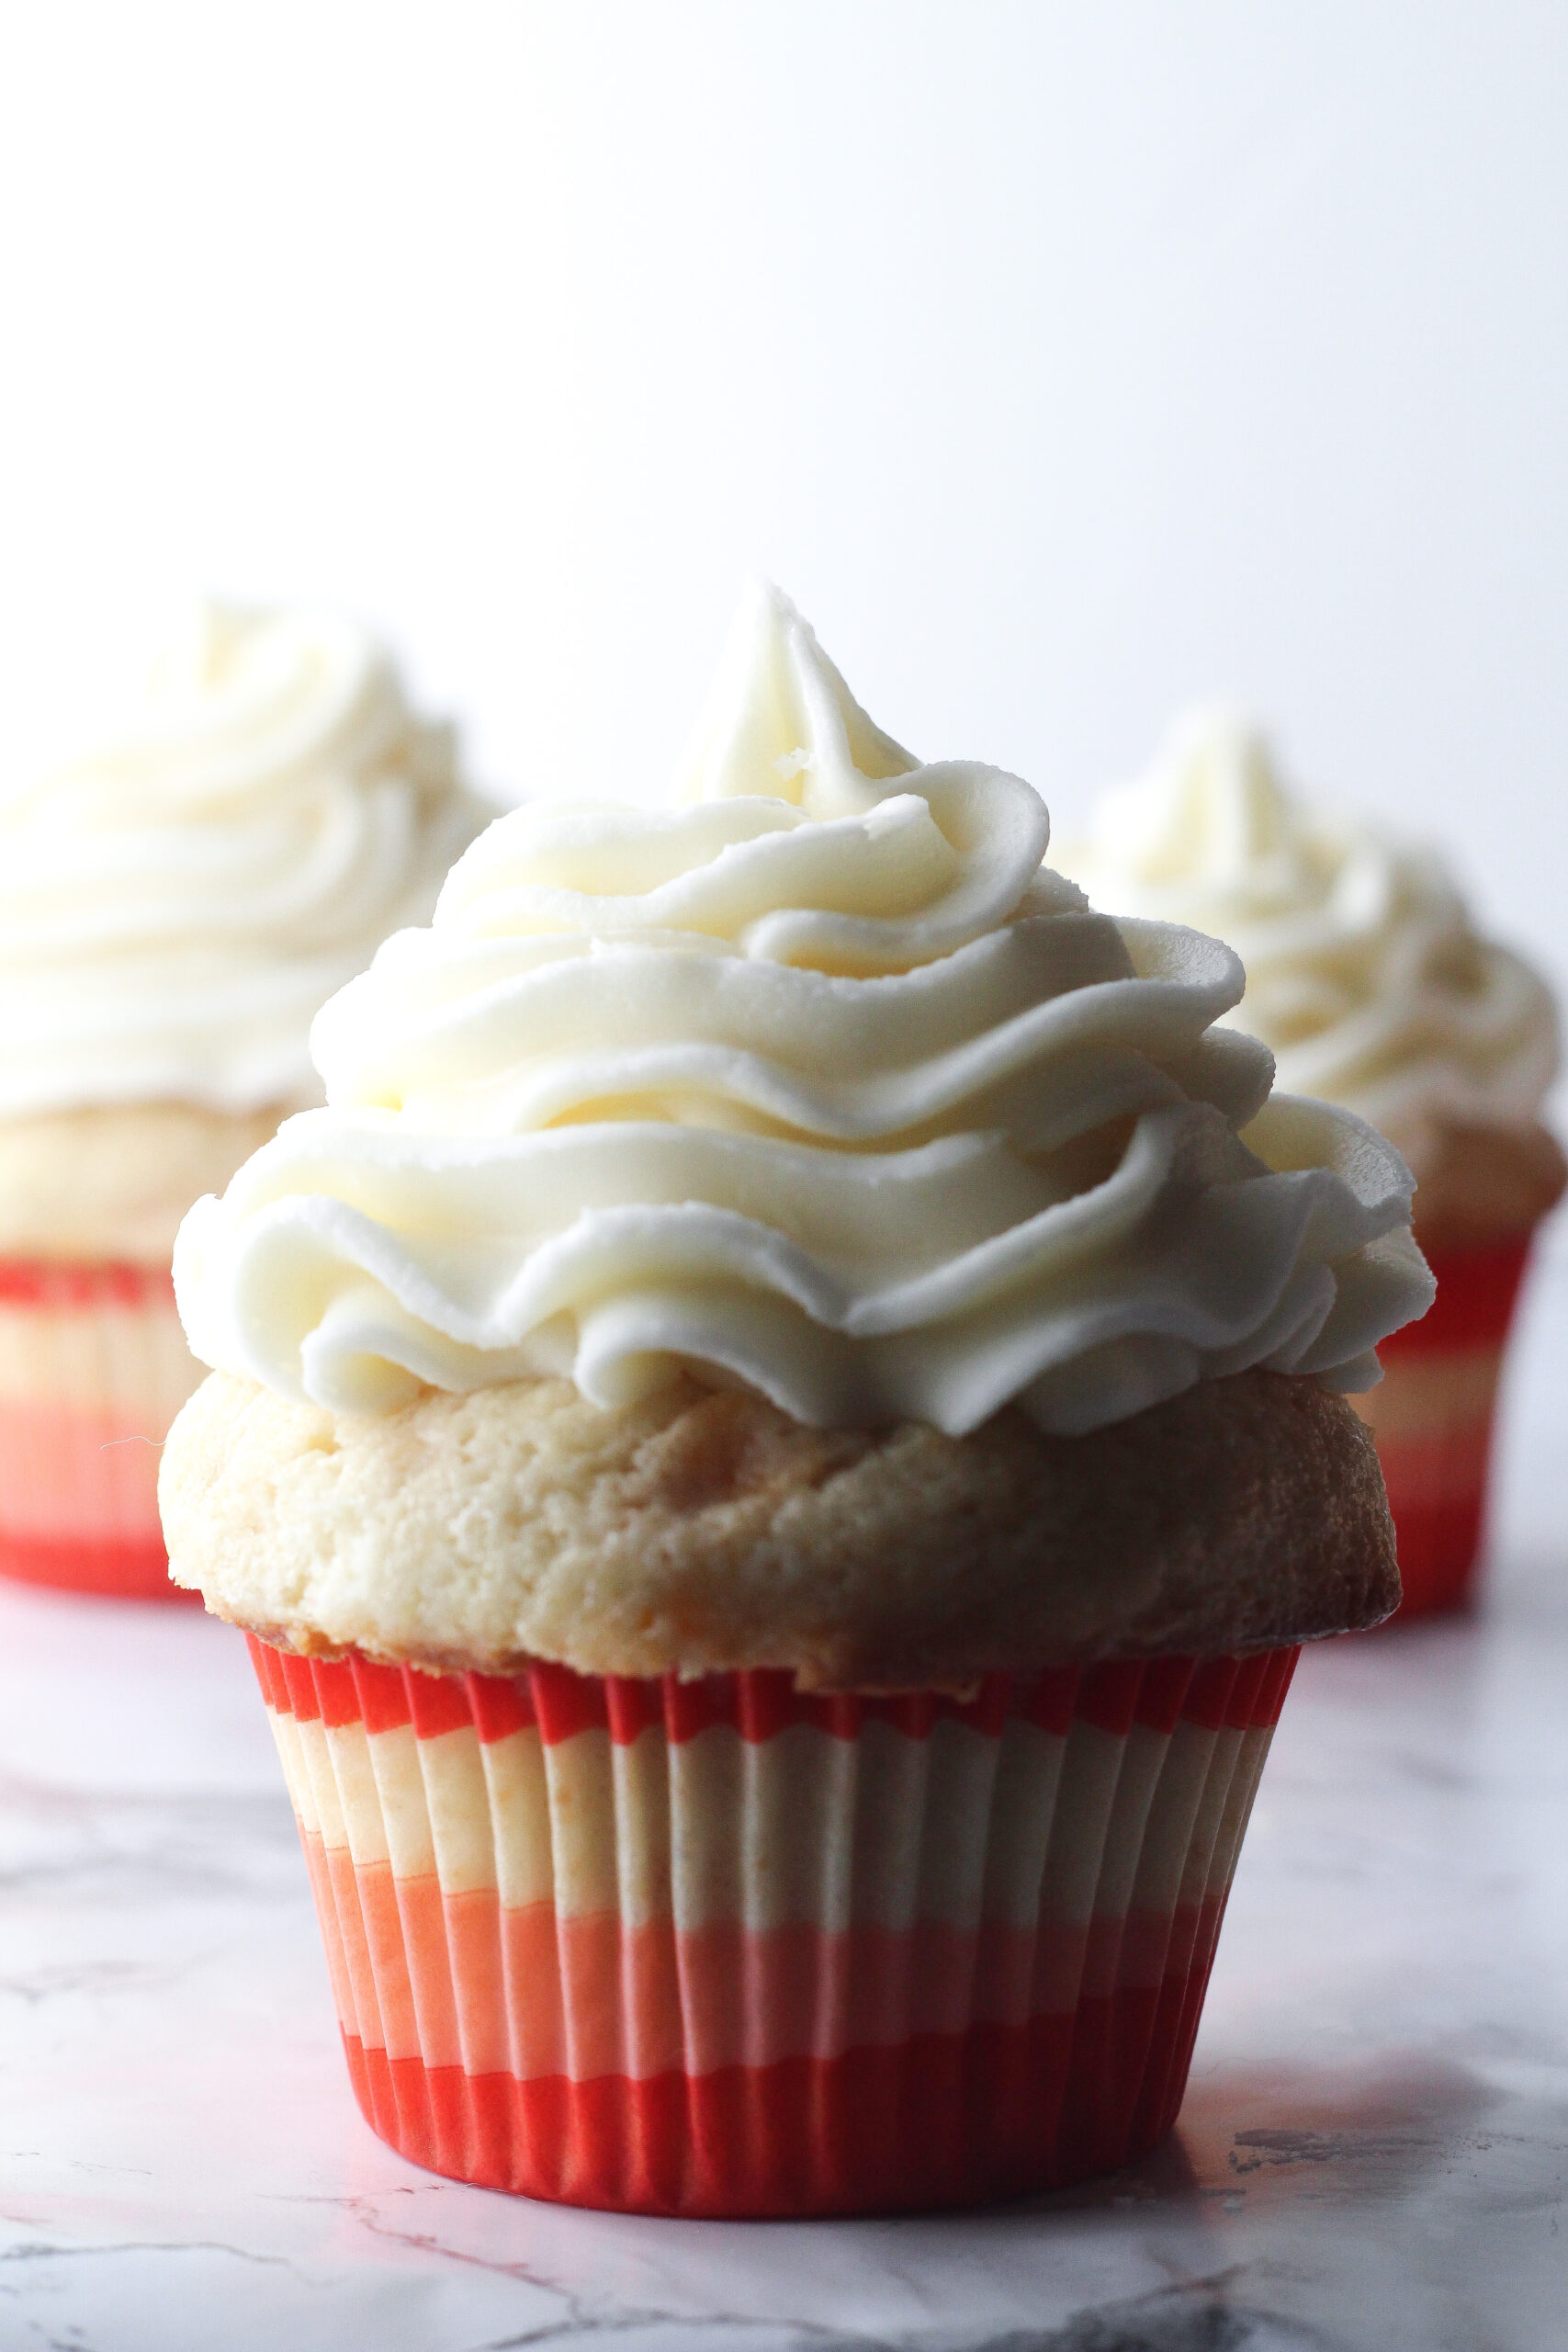 Close up of a bourbon peach sweet tea cupcake with two cupcakes in the back partially blocked by the one up front, all in red, white, and pink wrappers on a marbled surface in front of a white background